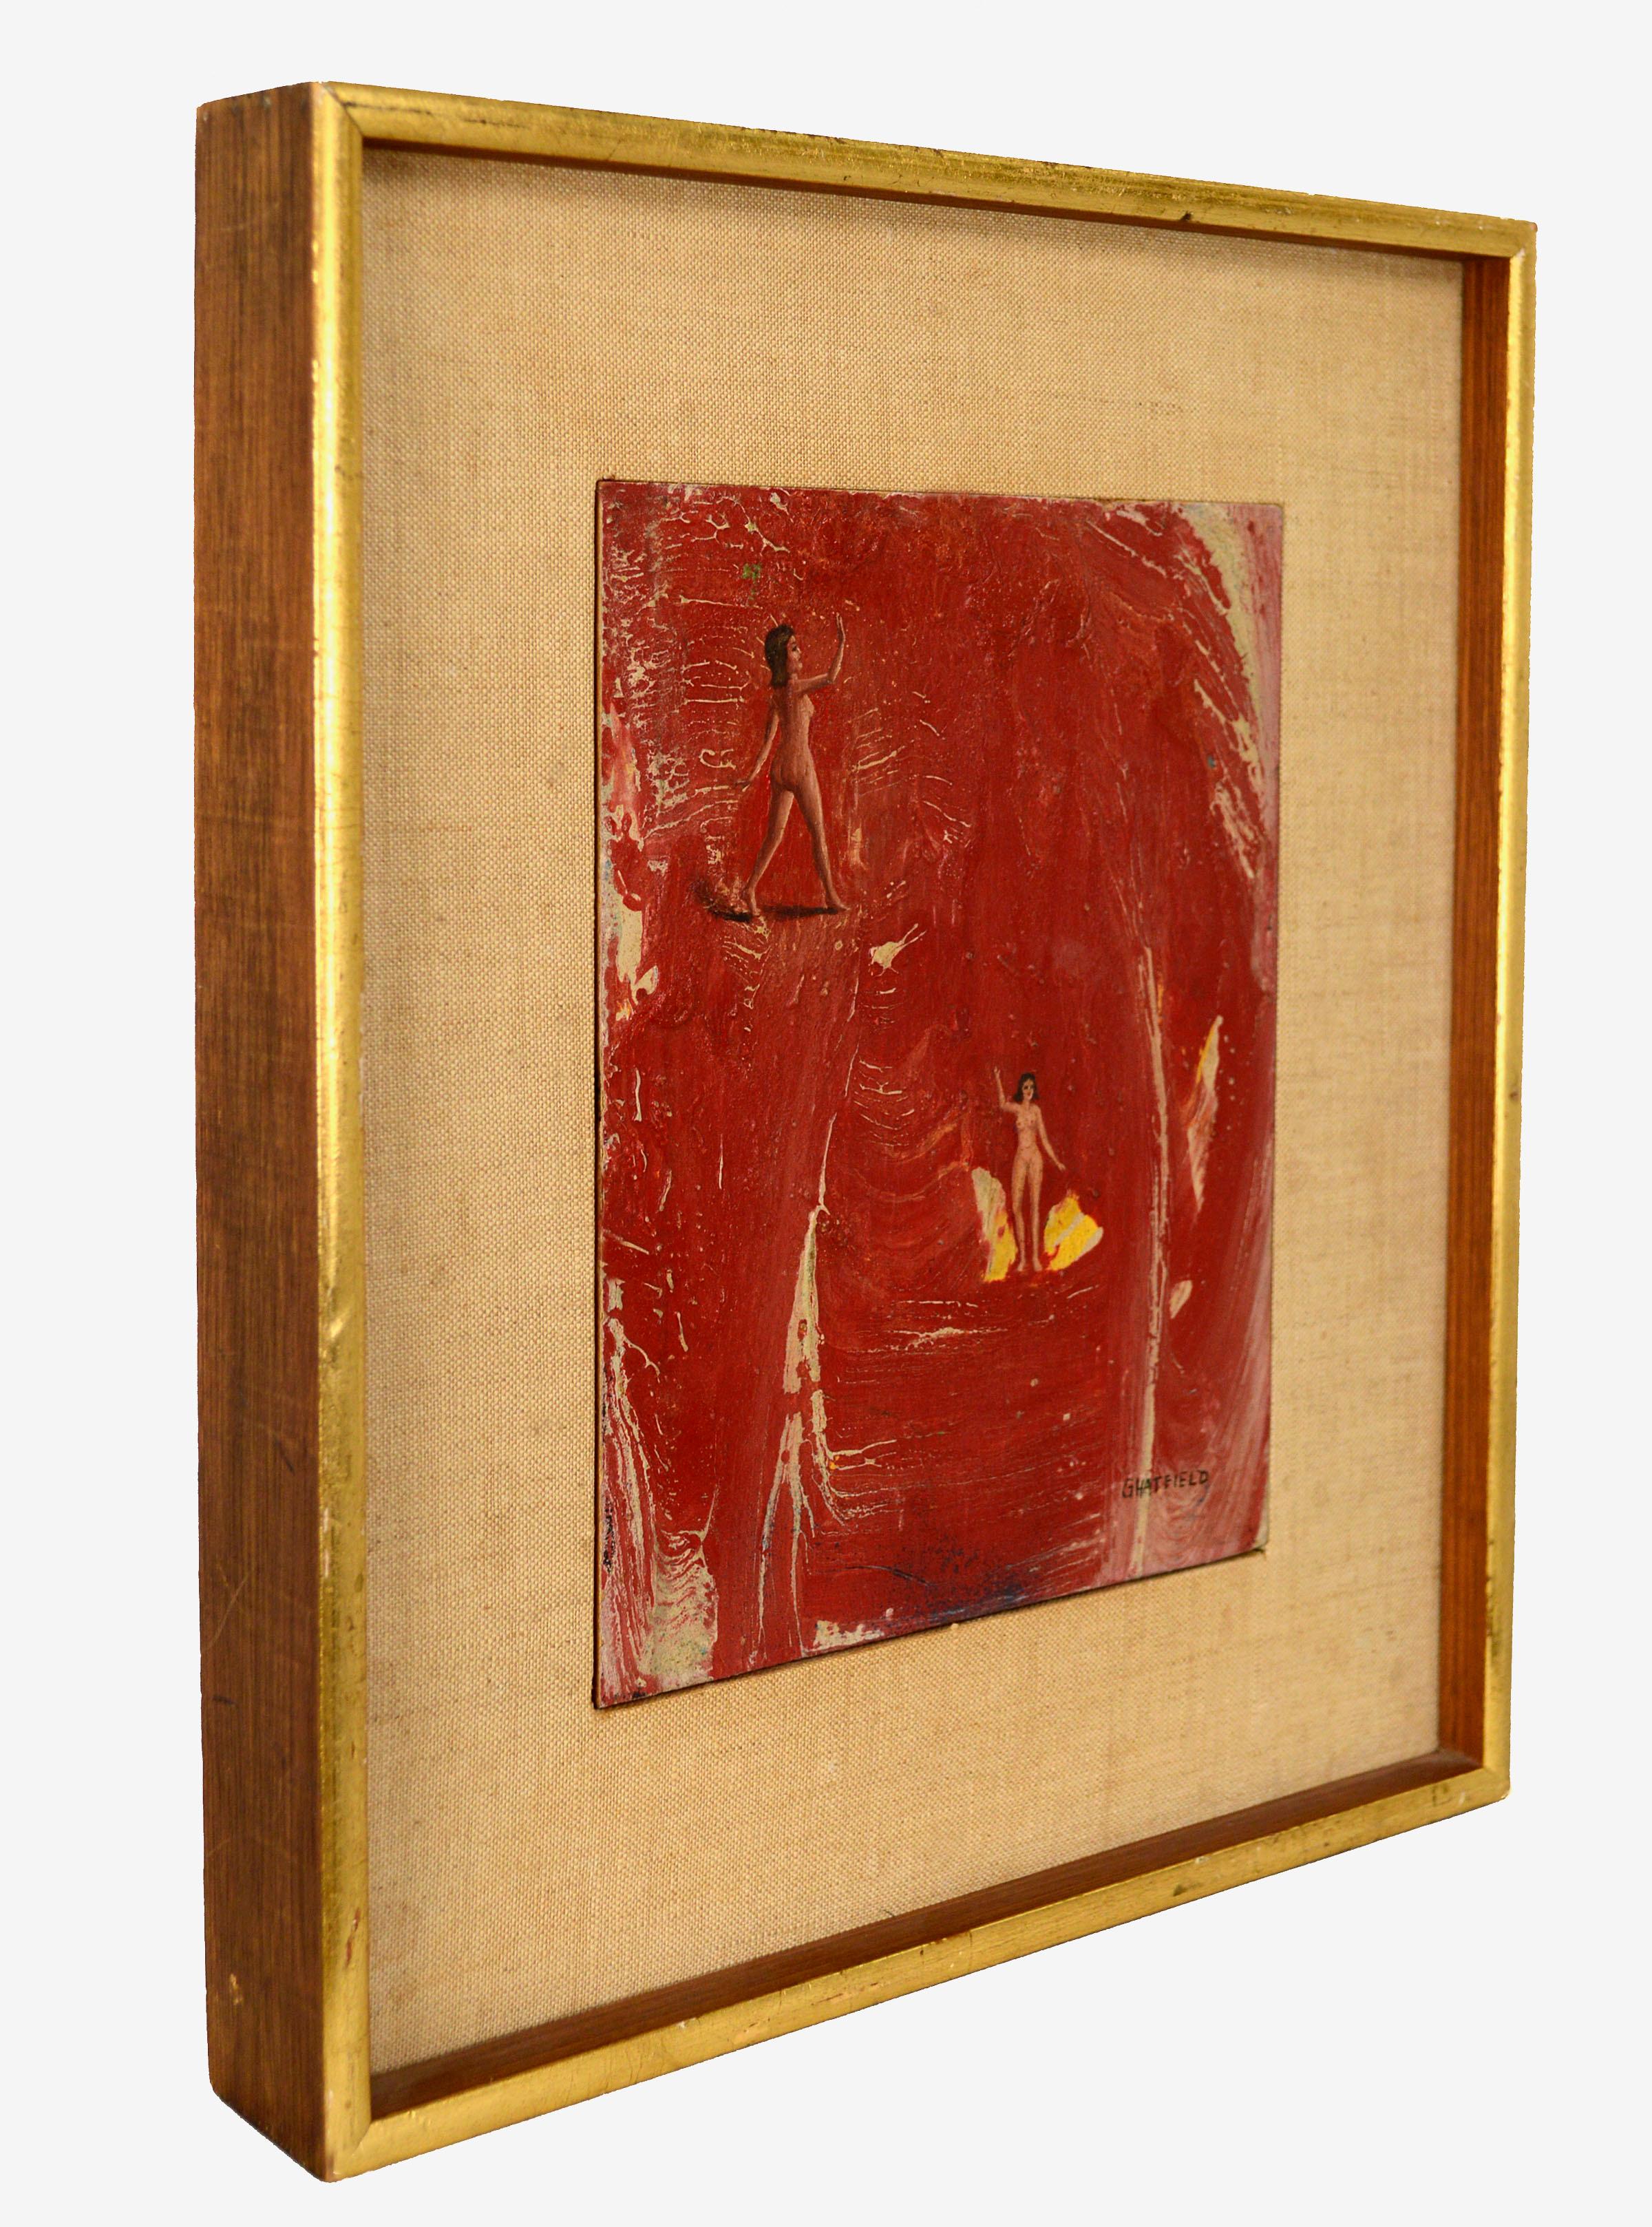 Compelling red abstract with two tiny female figures by Arkansas artist Gene Hatfield (American, 1925-2017). The piece consists of a textural red abstract plain that is swirled with beige, which contrasts from the two intricately detailed miniature